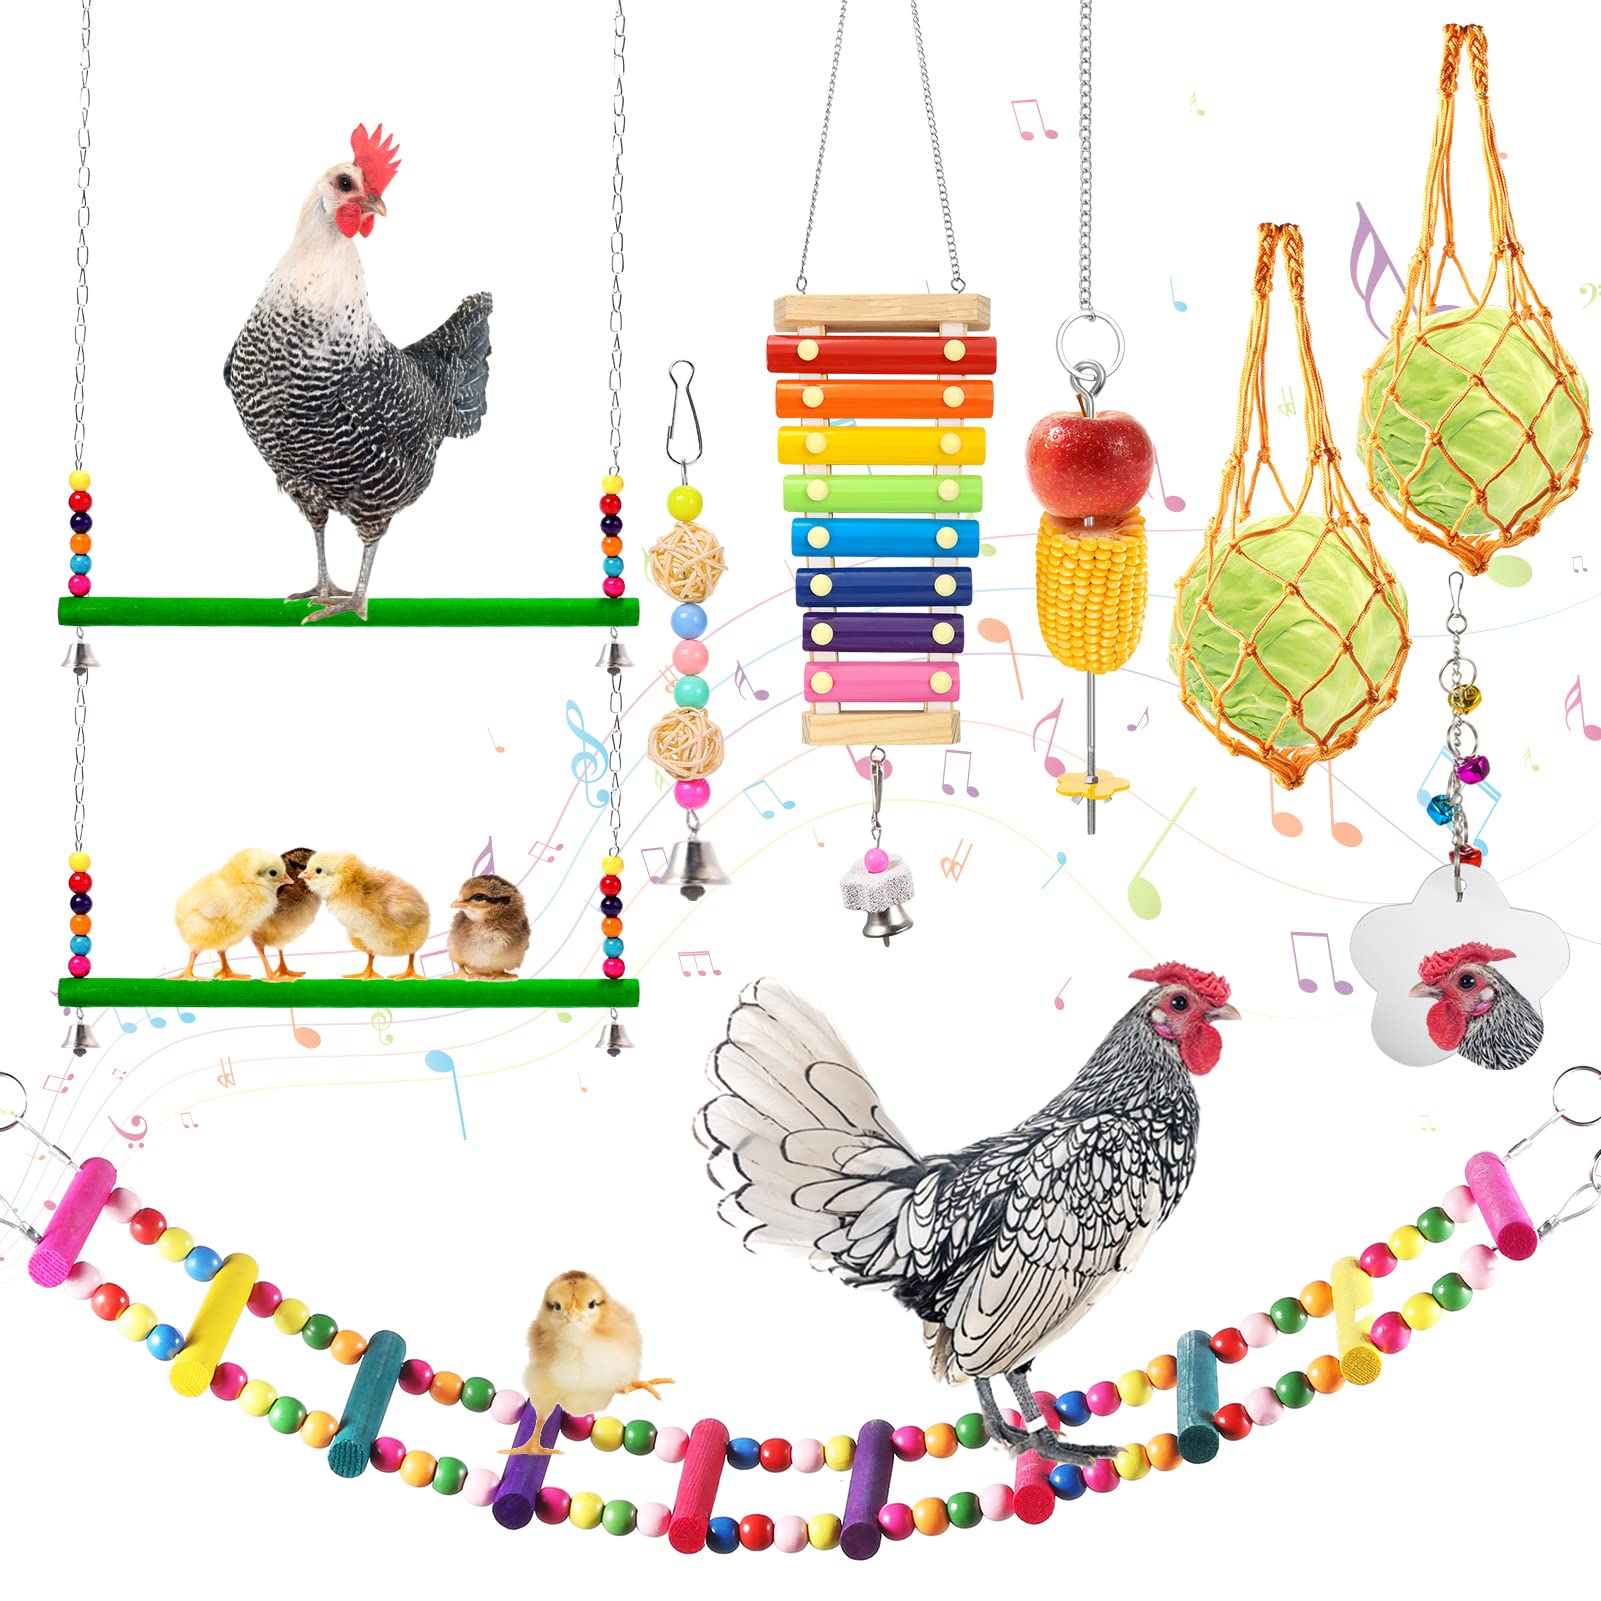 WDSHCR Chicken Toys Chicken Xylophone Toys for Hens A Chicken Swing Ladder Toys and Vegetable Hanging Feeder for Chicken Coop 3 Packs 